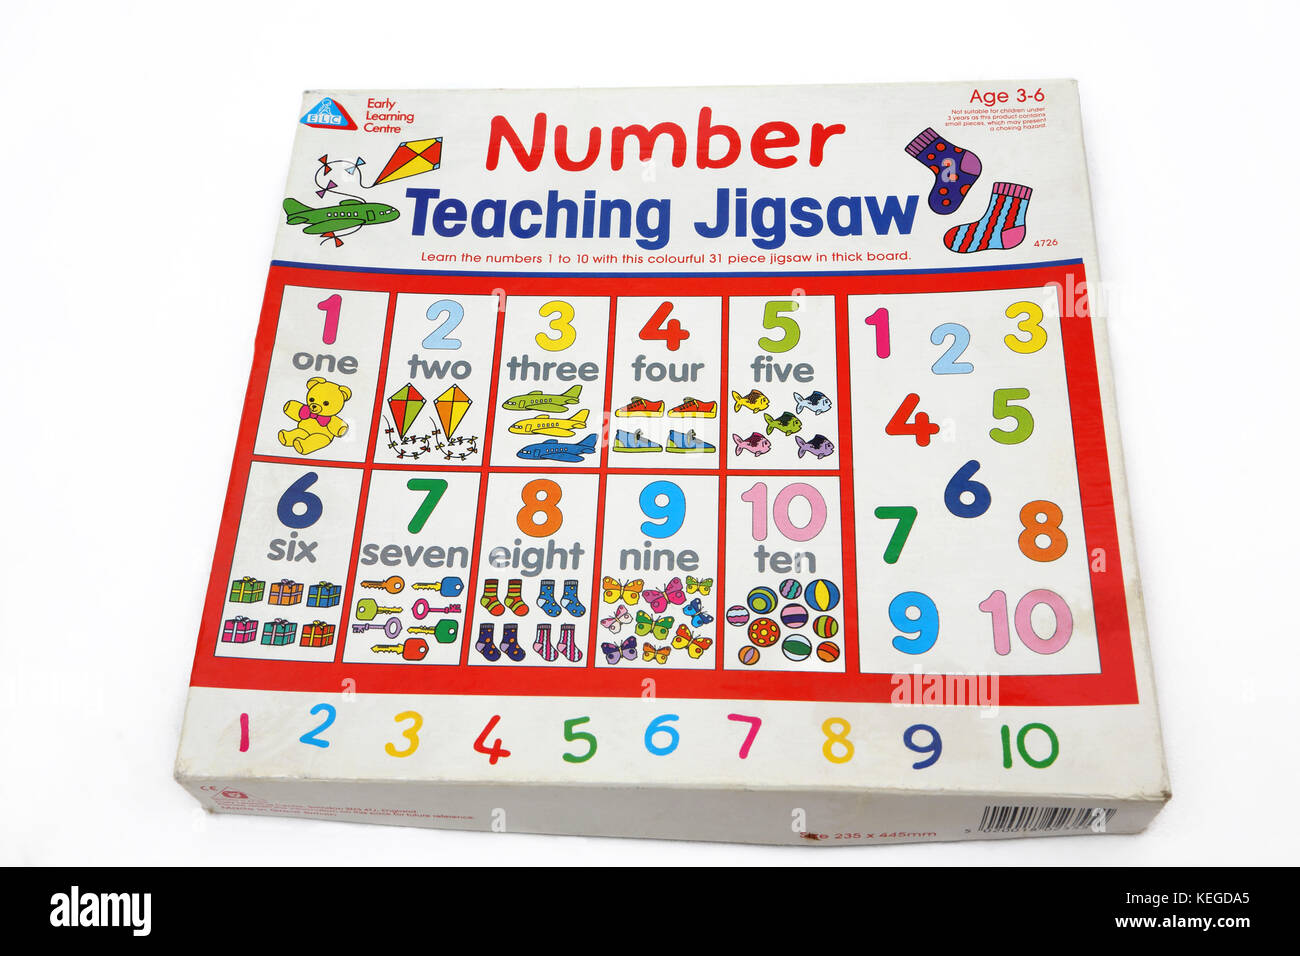 Early Learning Centre Number Teaching Jigsaw Stock Photo